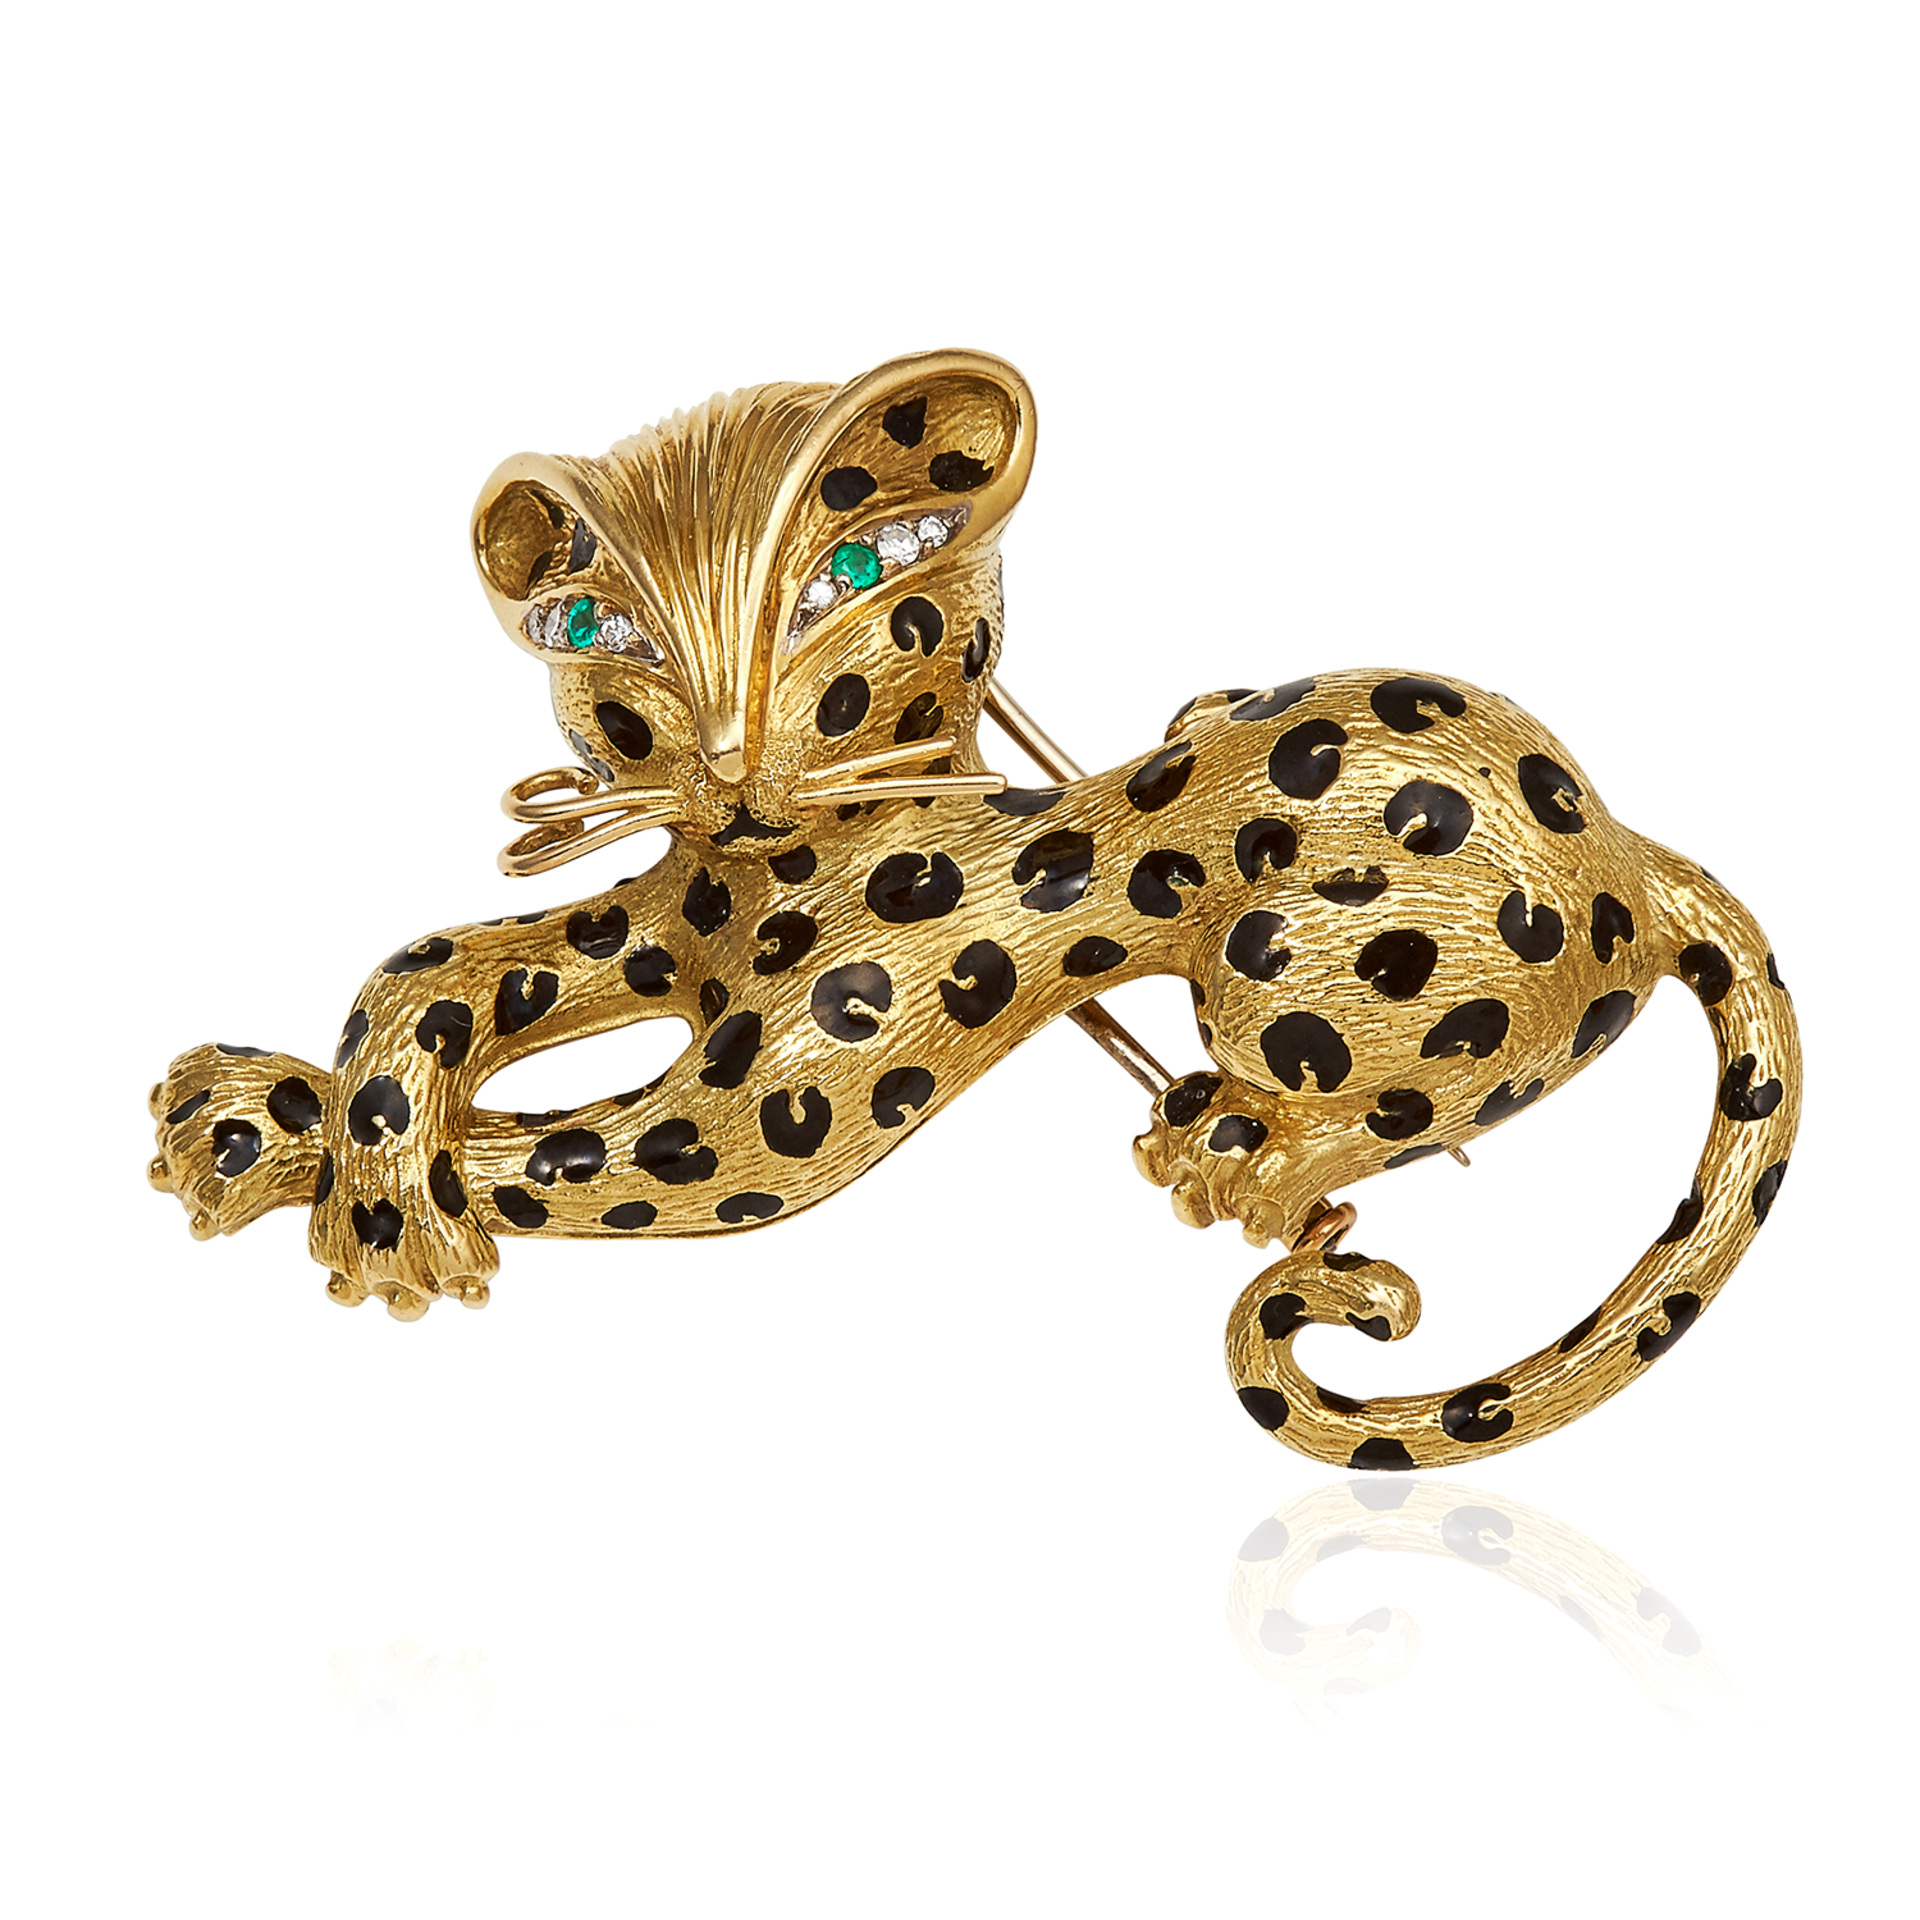 A VINTAGE EMERALD, DIAMOND AND ENAMEL LEOPARD BROOCH, FRED in 18ct yellow gold, designed as a